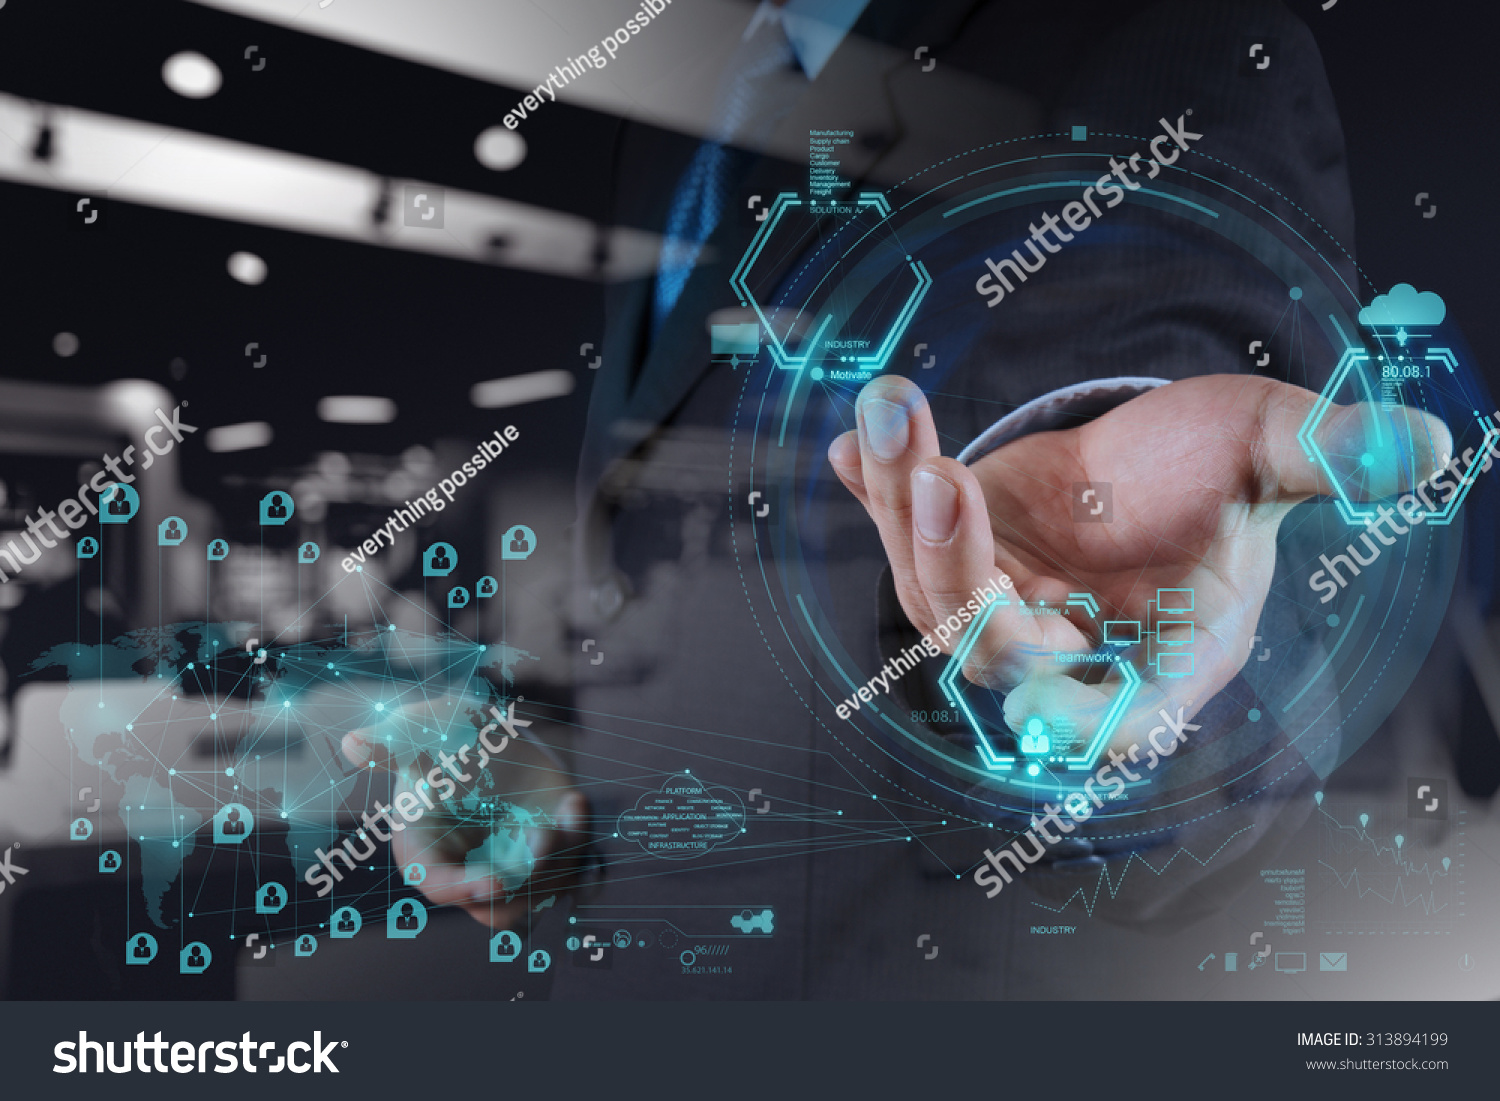 double exposure of businessman working with new modern computer show social network structure as concept #313894199